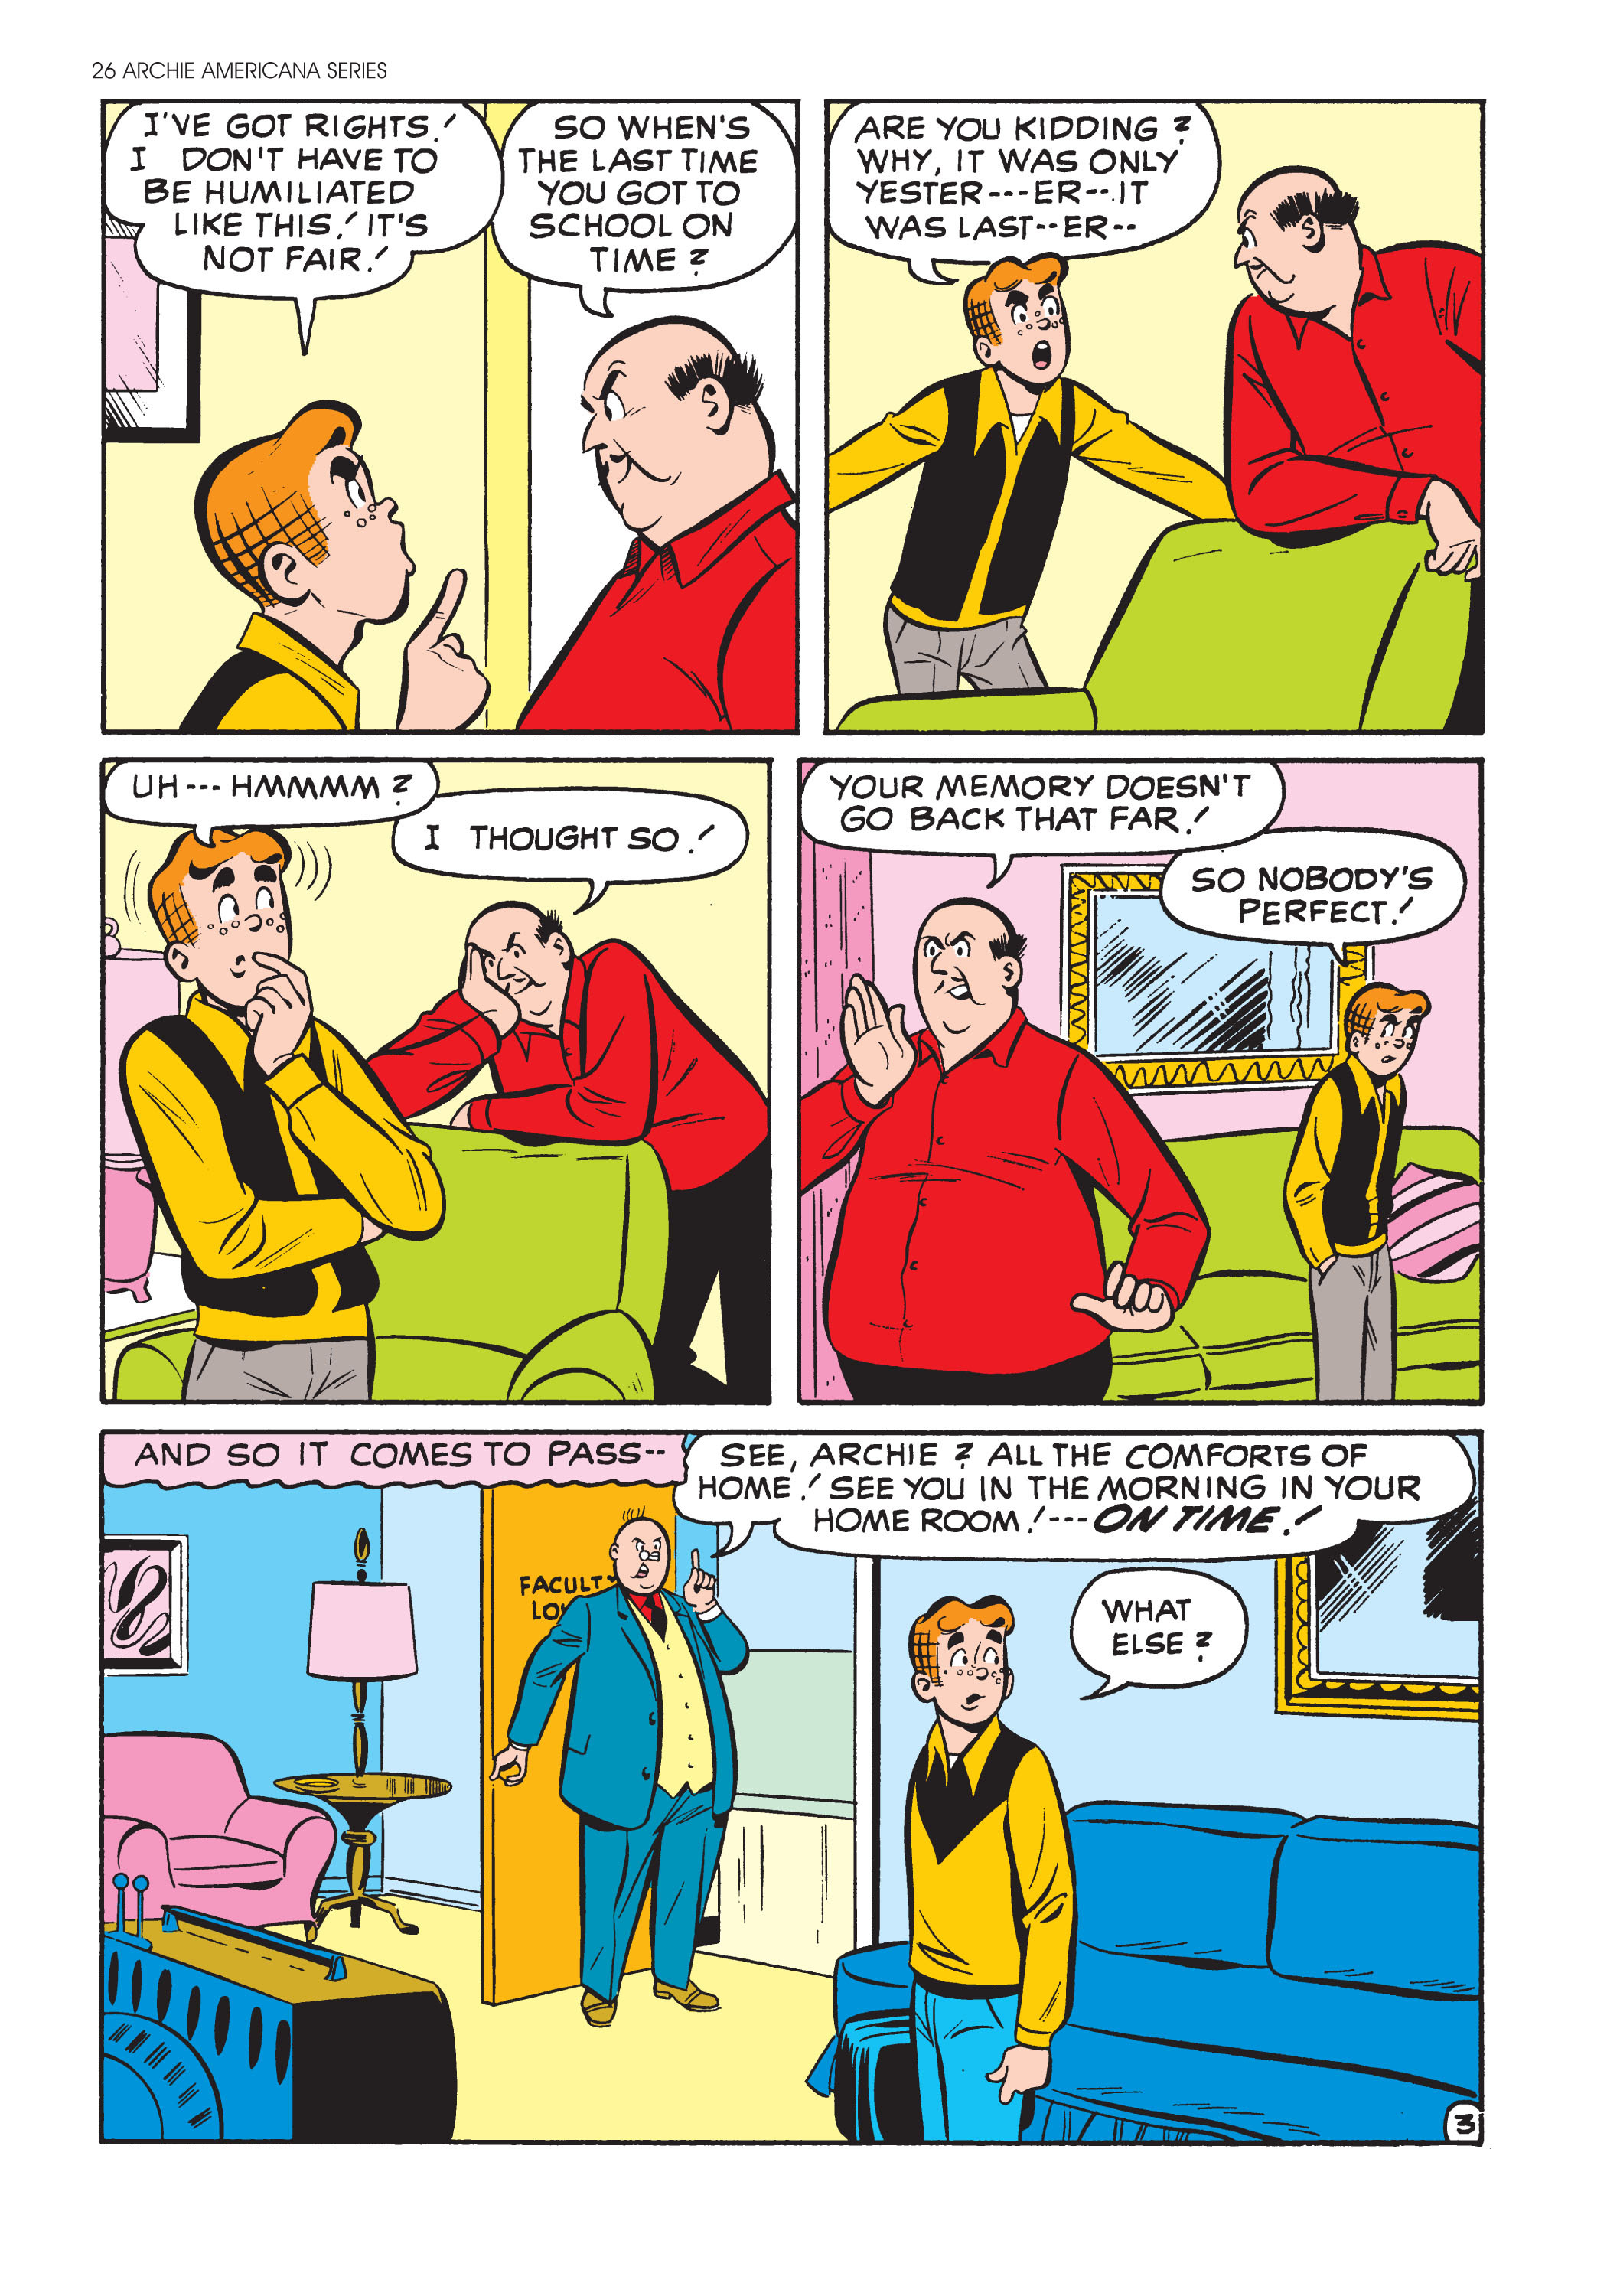 Read online Archie Americana Series comic -  Issue # TPB 4 - 28